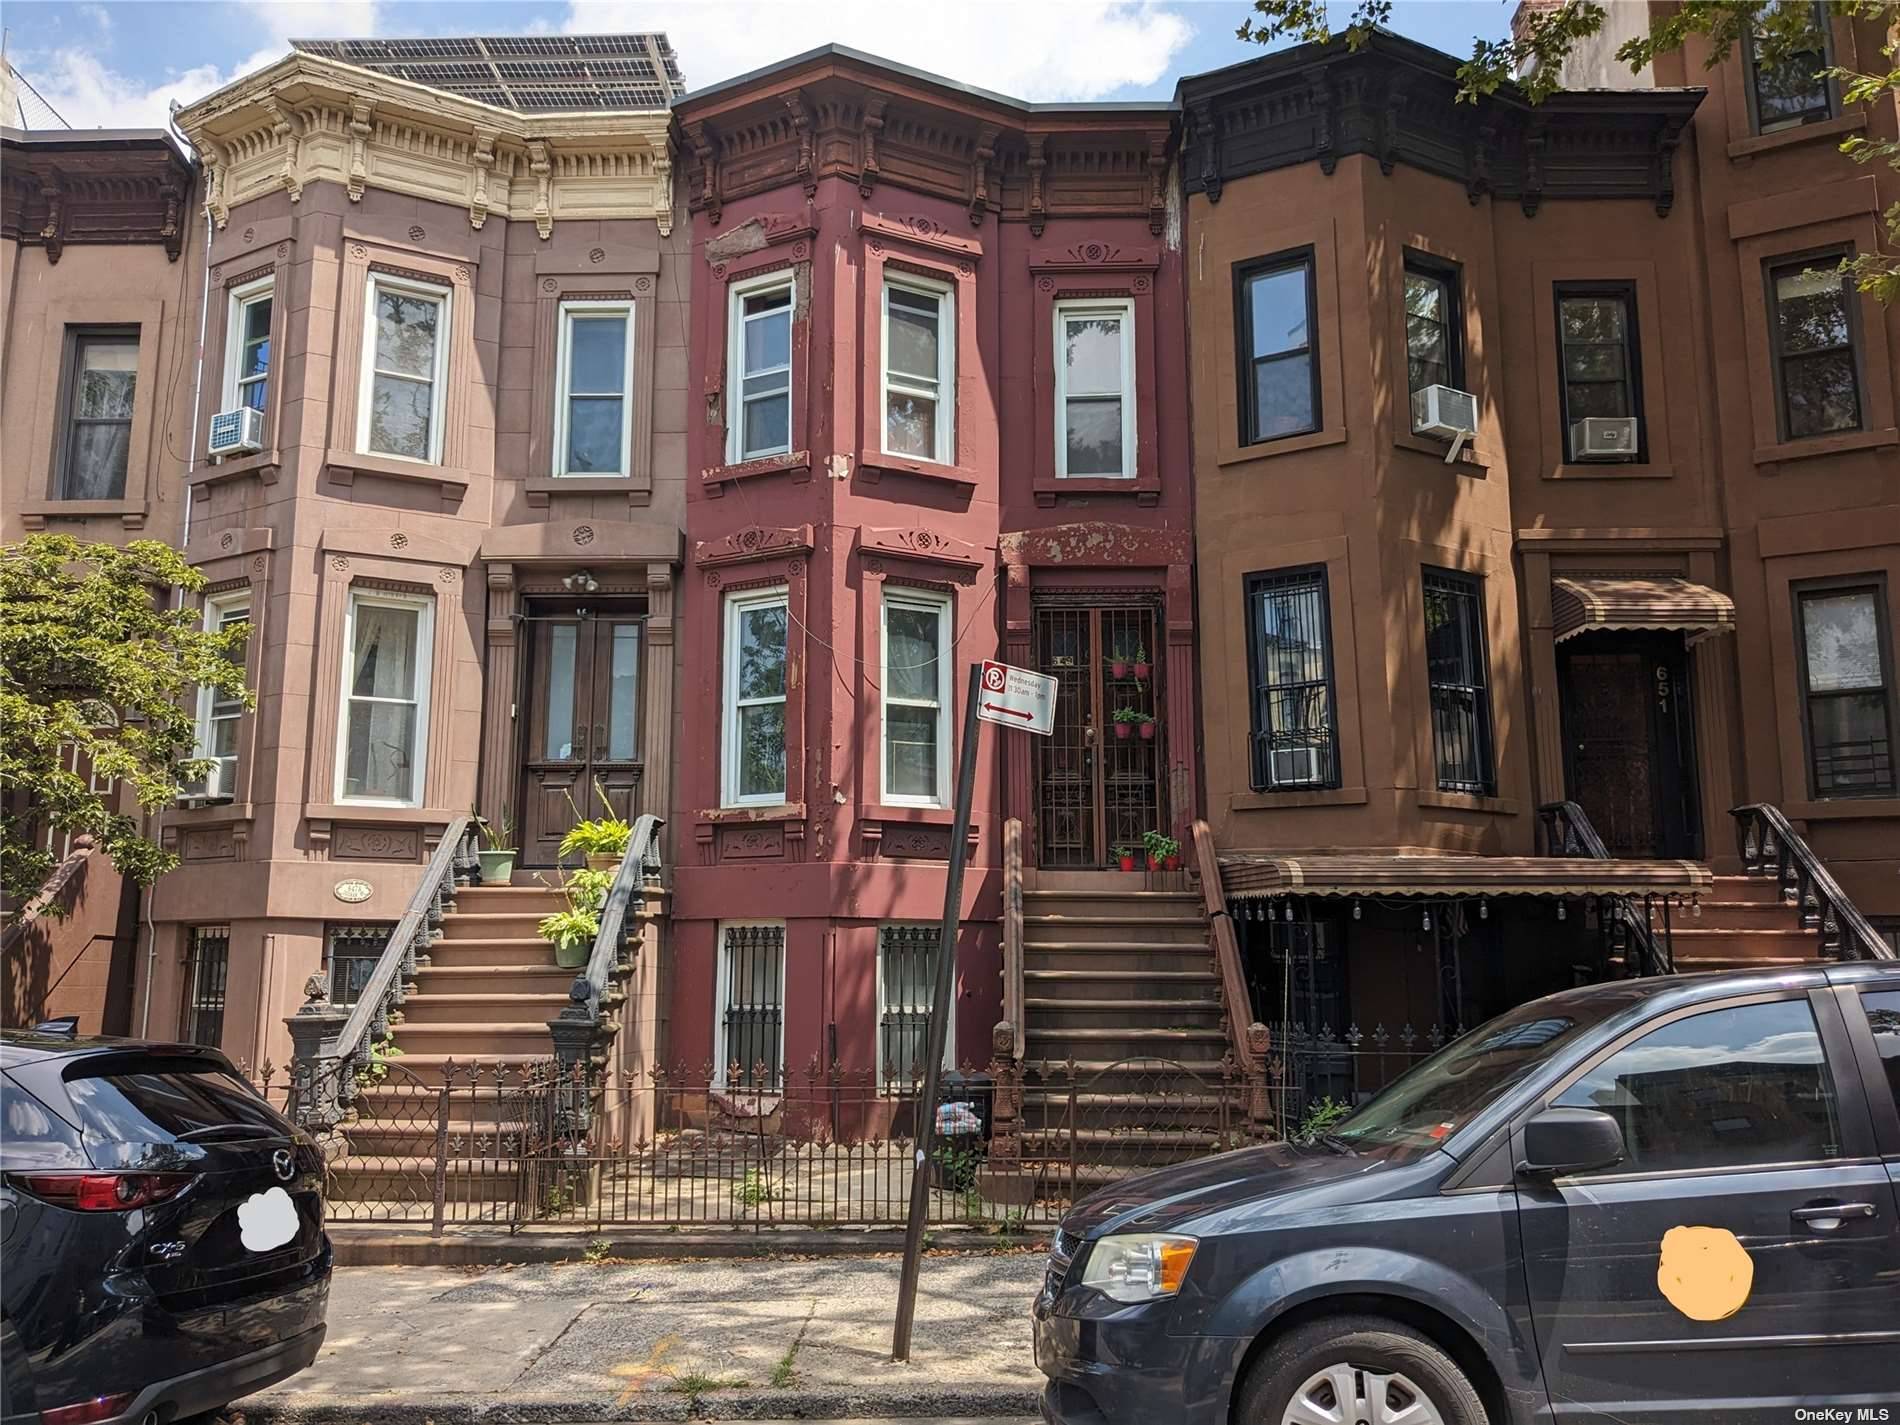 Location, Location, Location Don't miss this opportunity to make this exceptional two family Park Slope brownstone your own.